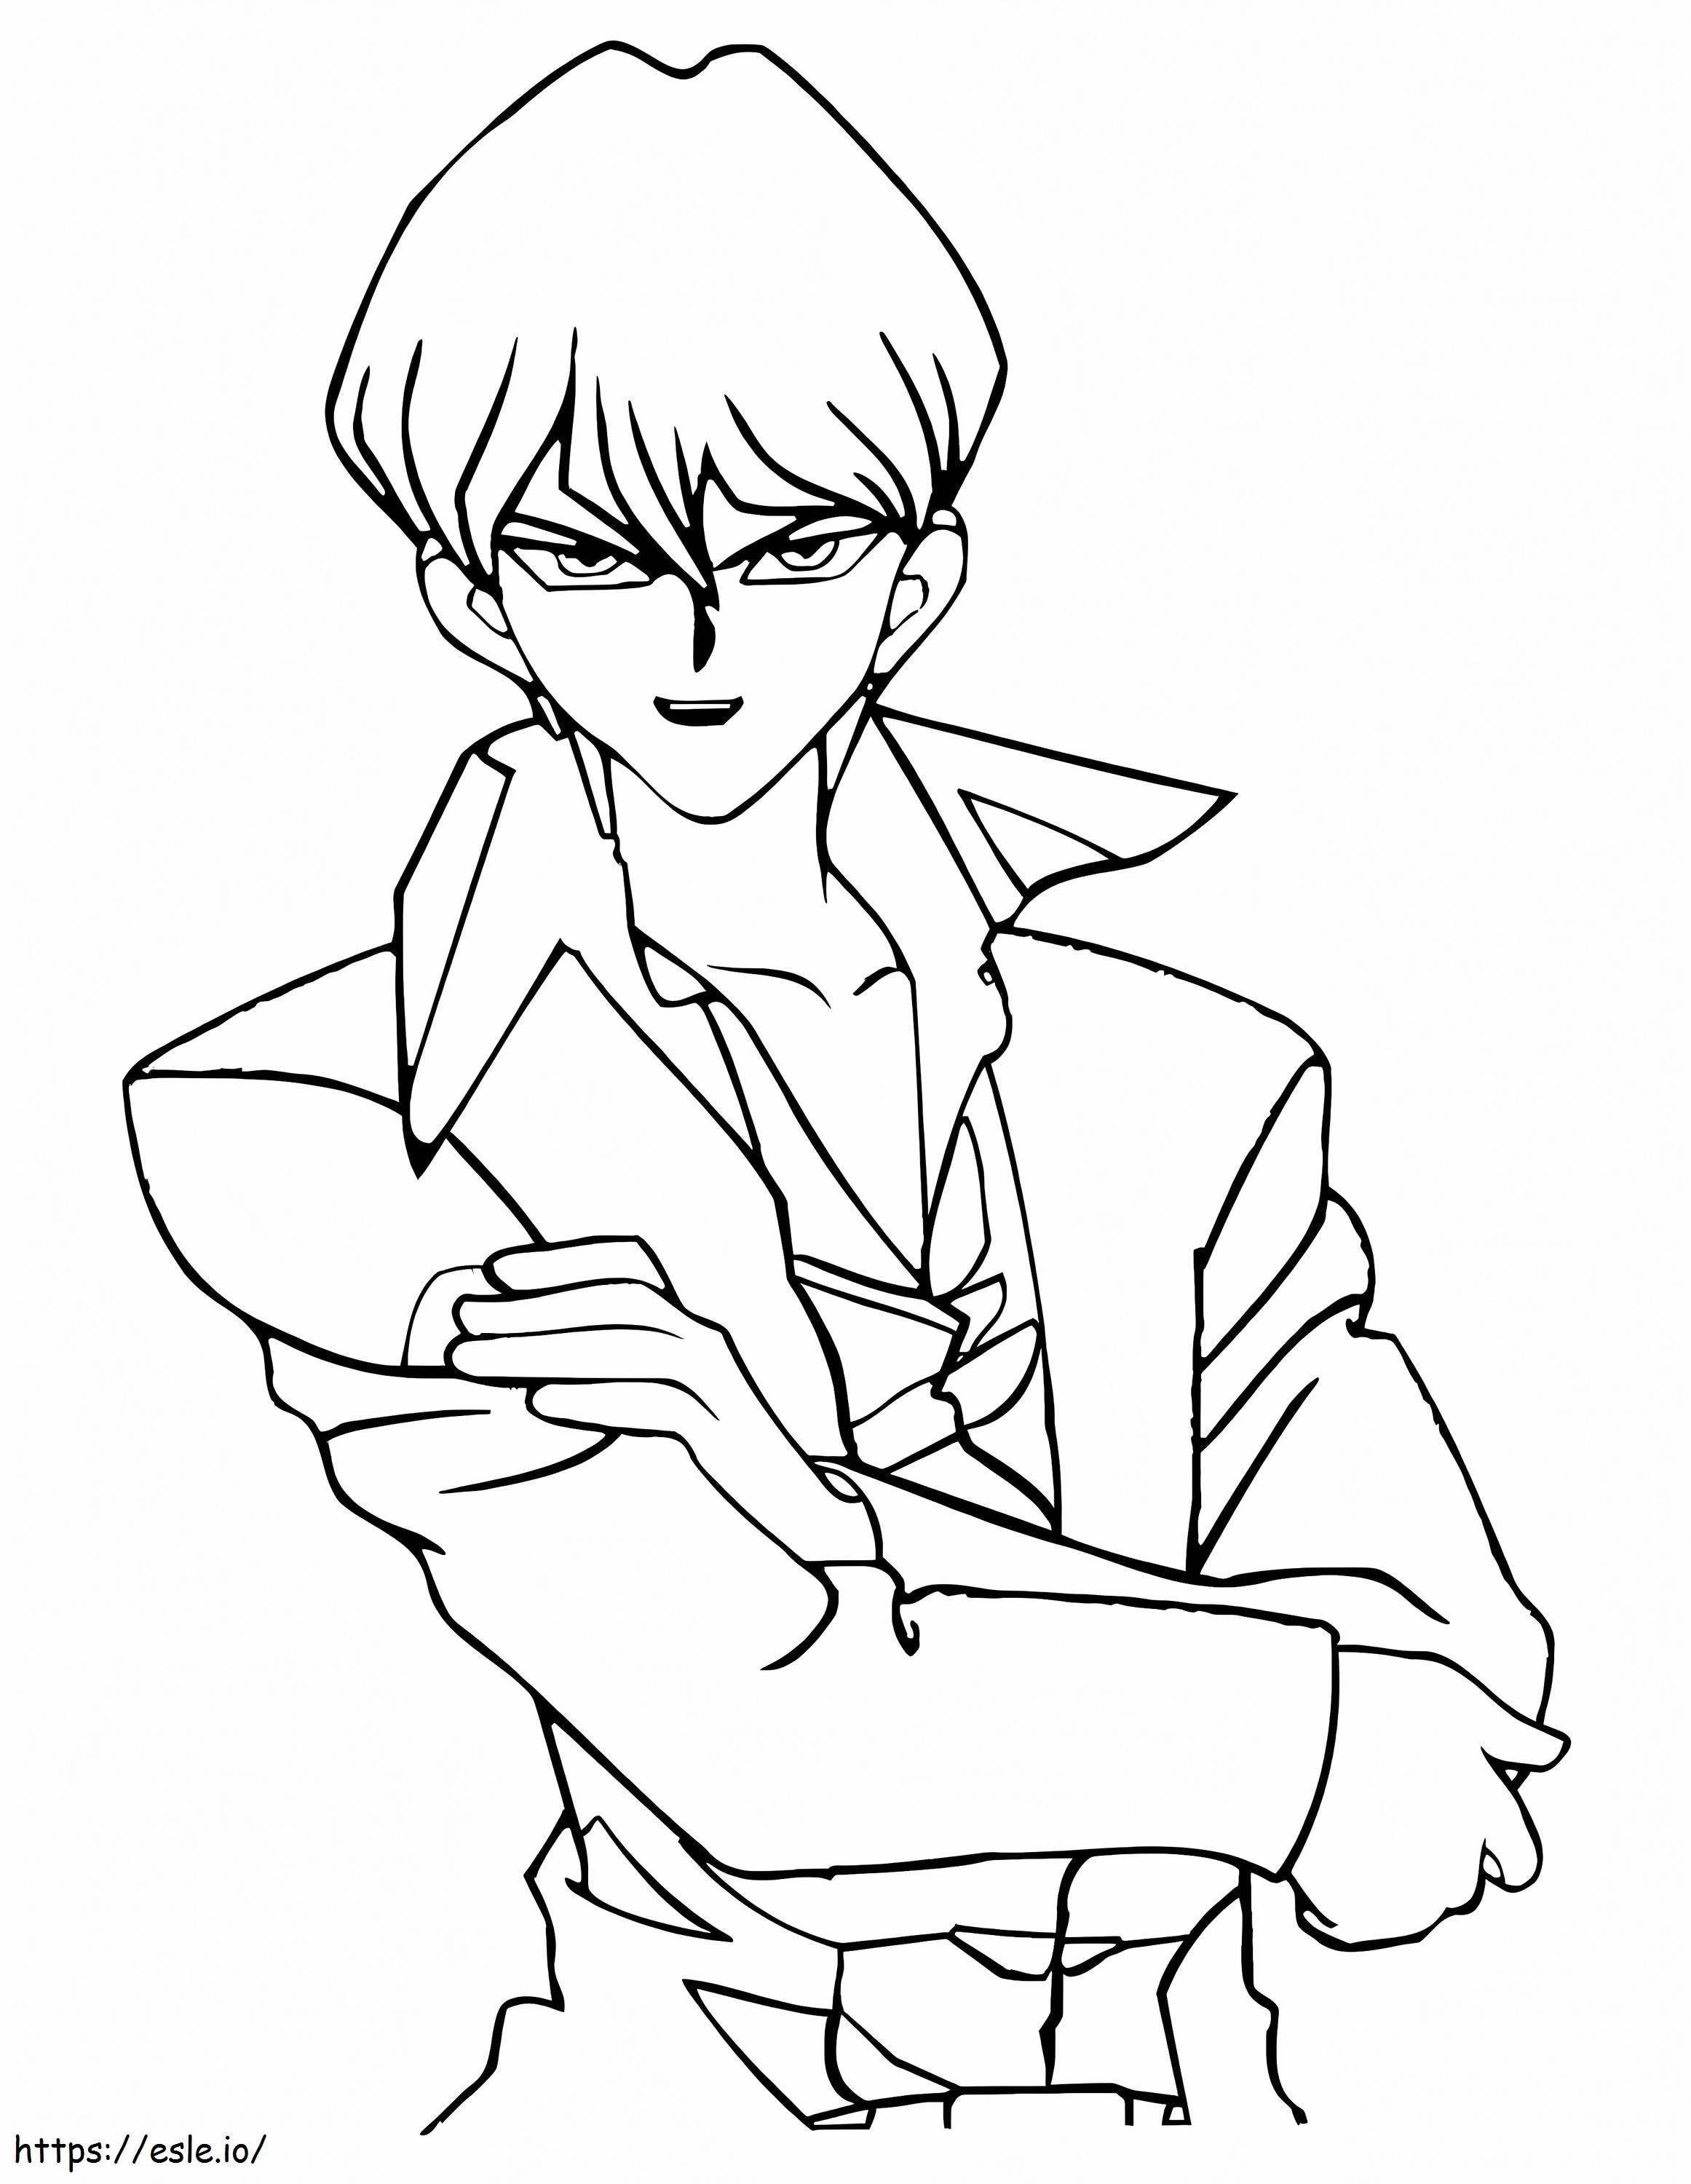 Awesome Seto Kaiba From Yu Gi Oh coloring page